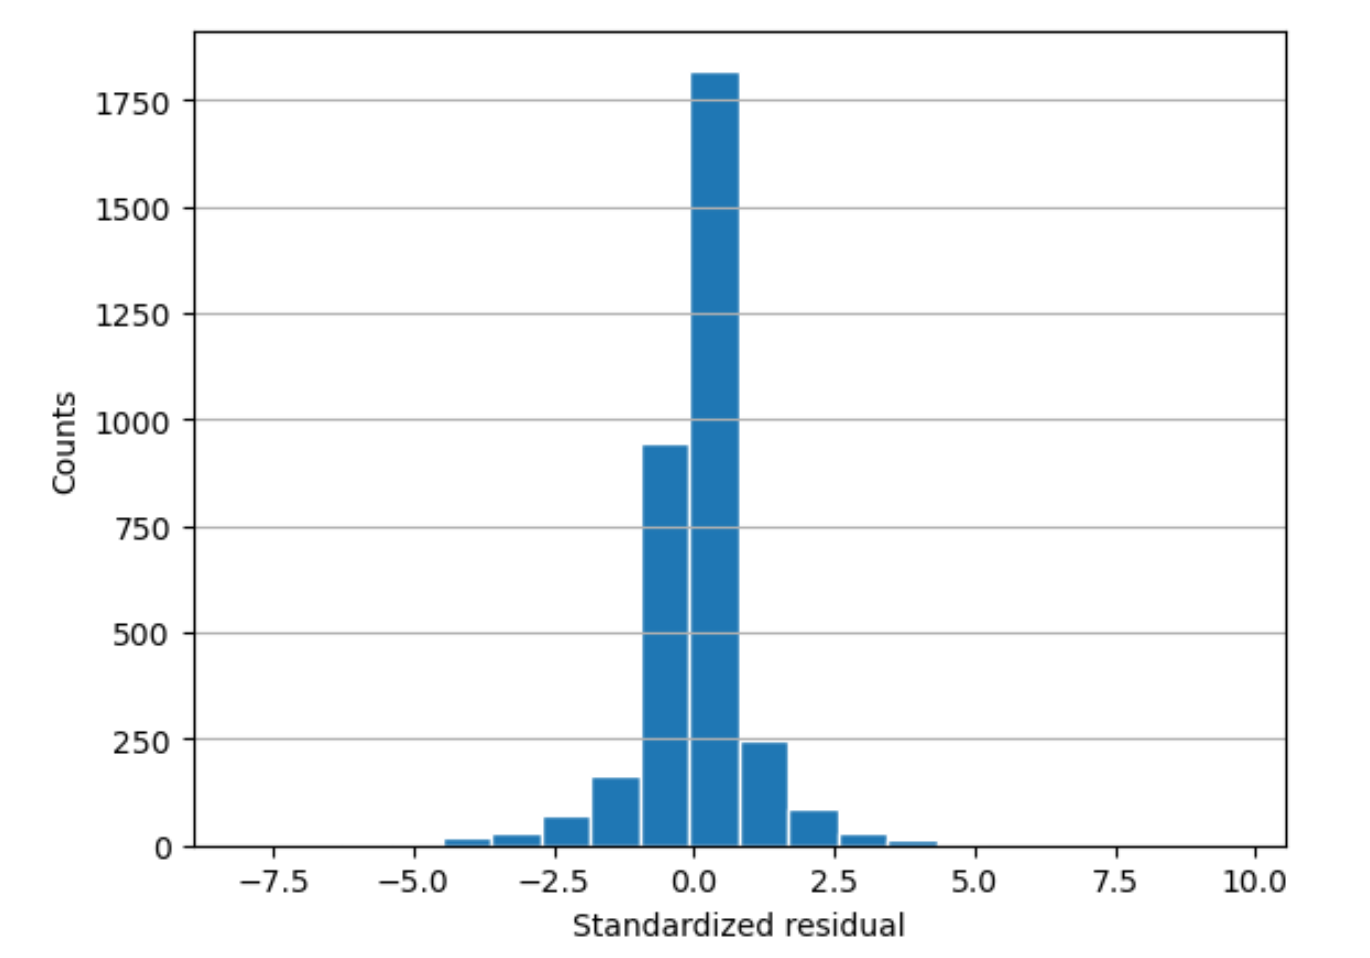 Standardized residual value close to zero, indicating that the model fits the data well.